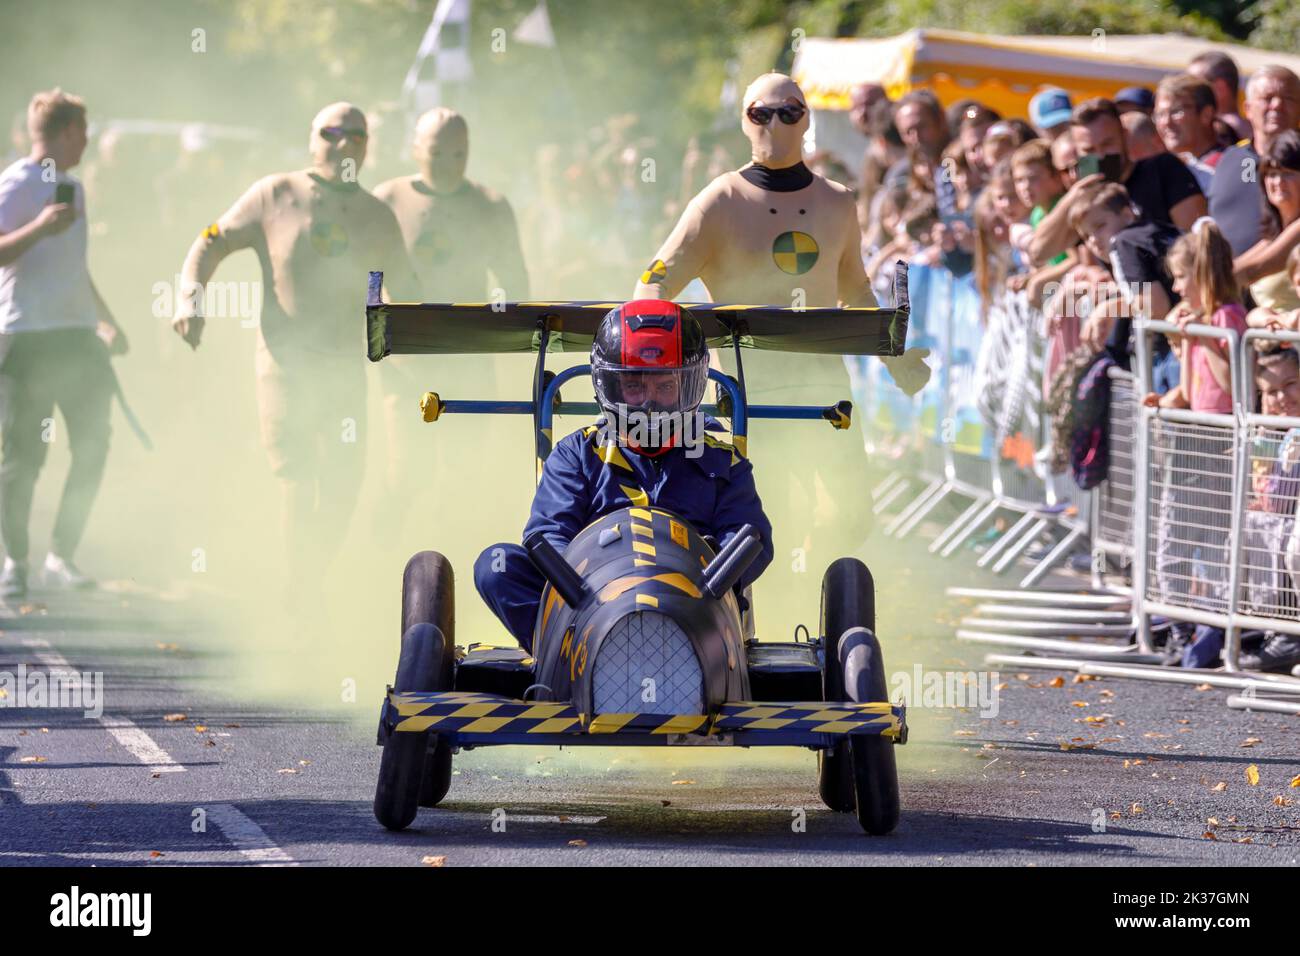 Eastbourne, UK. 25th Sep 2022. Participants enjoy a sunny day in Eastbourne as they take part in the annual soapbox race. Eastbourne, East Sussex,UK. Credit: Ed Brown/Alamy Live News Stock Photo